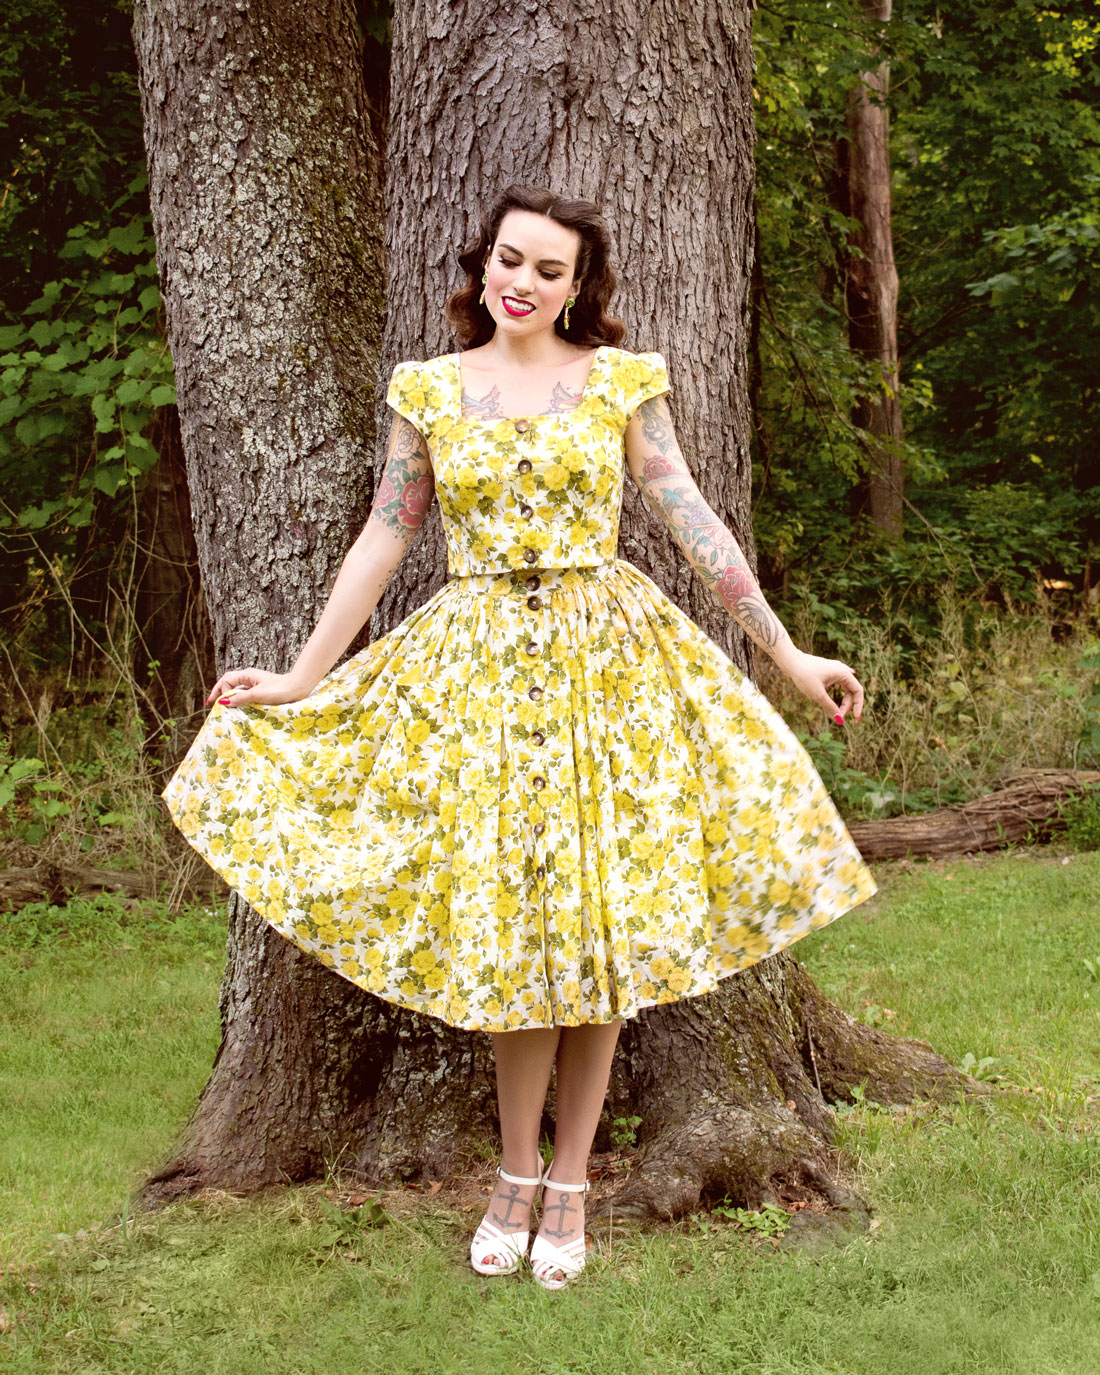 Picnic Skirt sewing pattern from Charm Patterns by Gertie